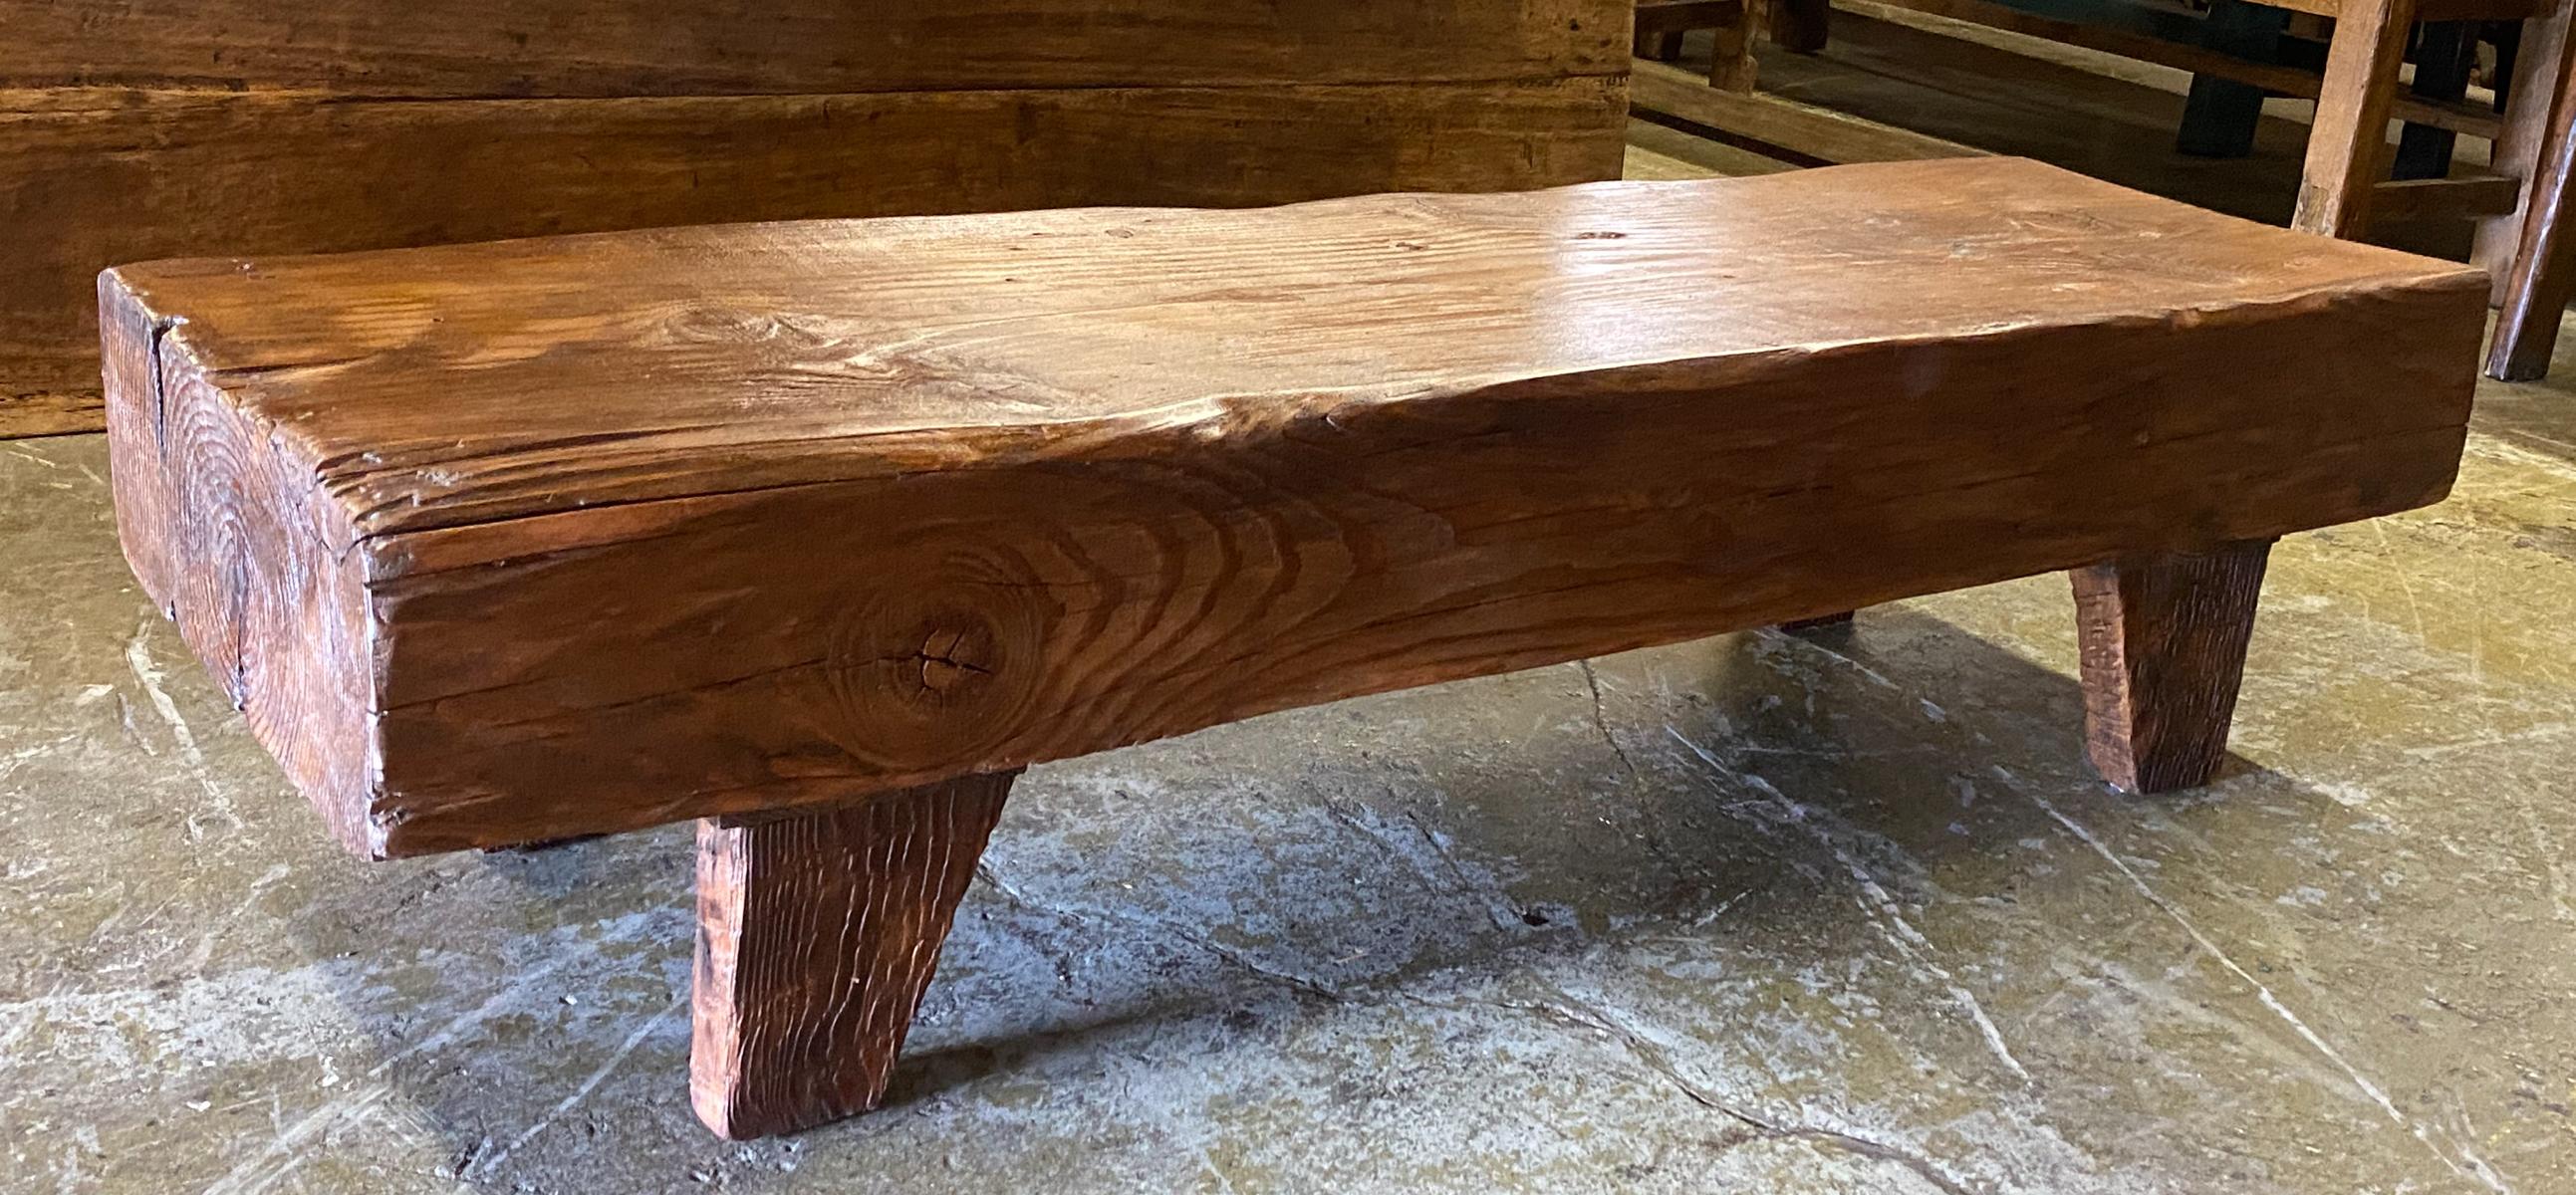 This low bench or coffee table is made from reclaimed Douglas fir. The thickness of the top is 7